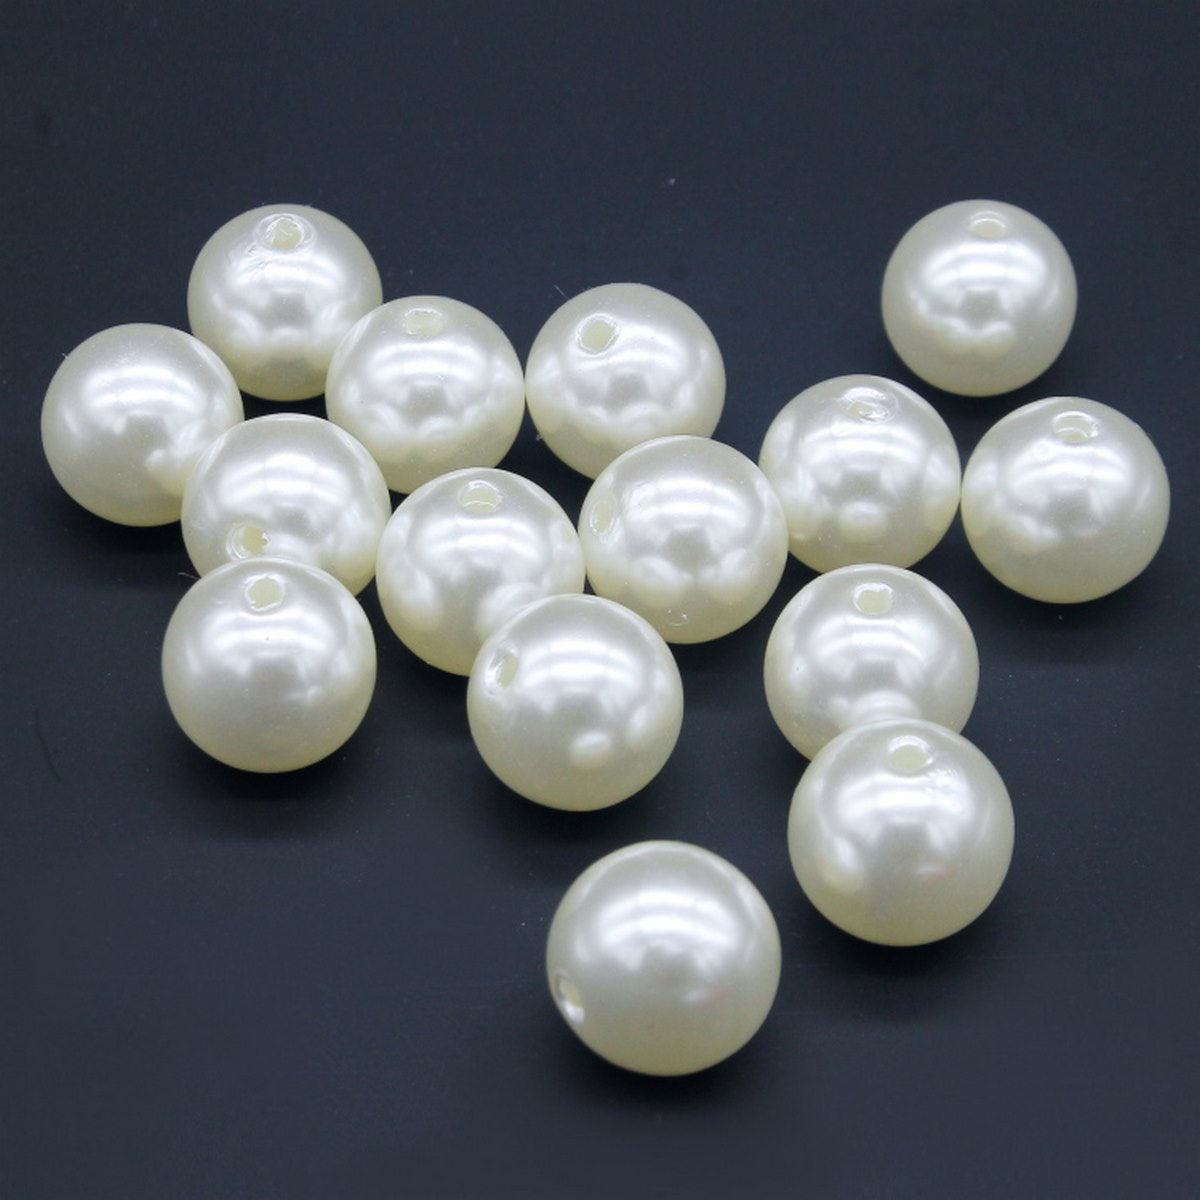 jags-mumbai Craft Accessories Jags Craft Beads Pearl Colour 16mm 25gm CPM-6